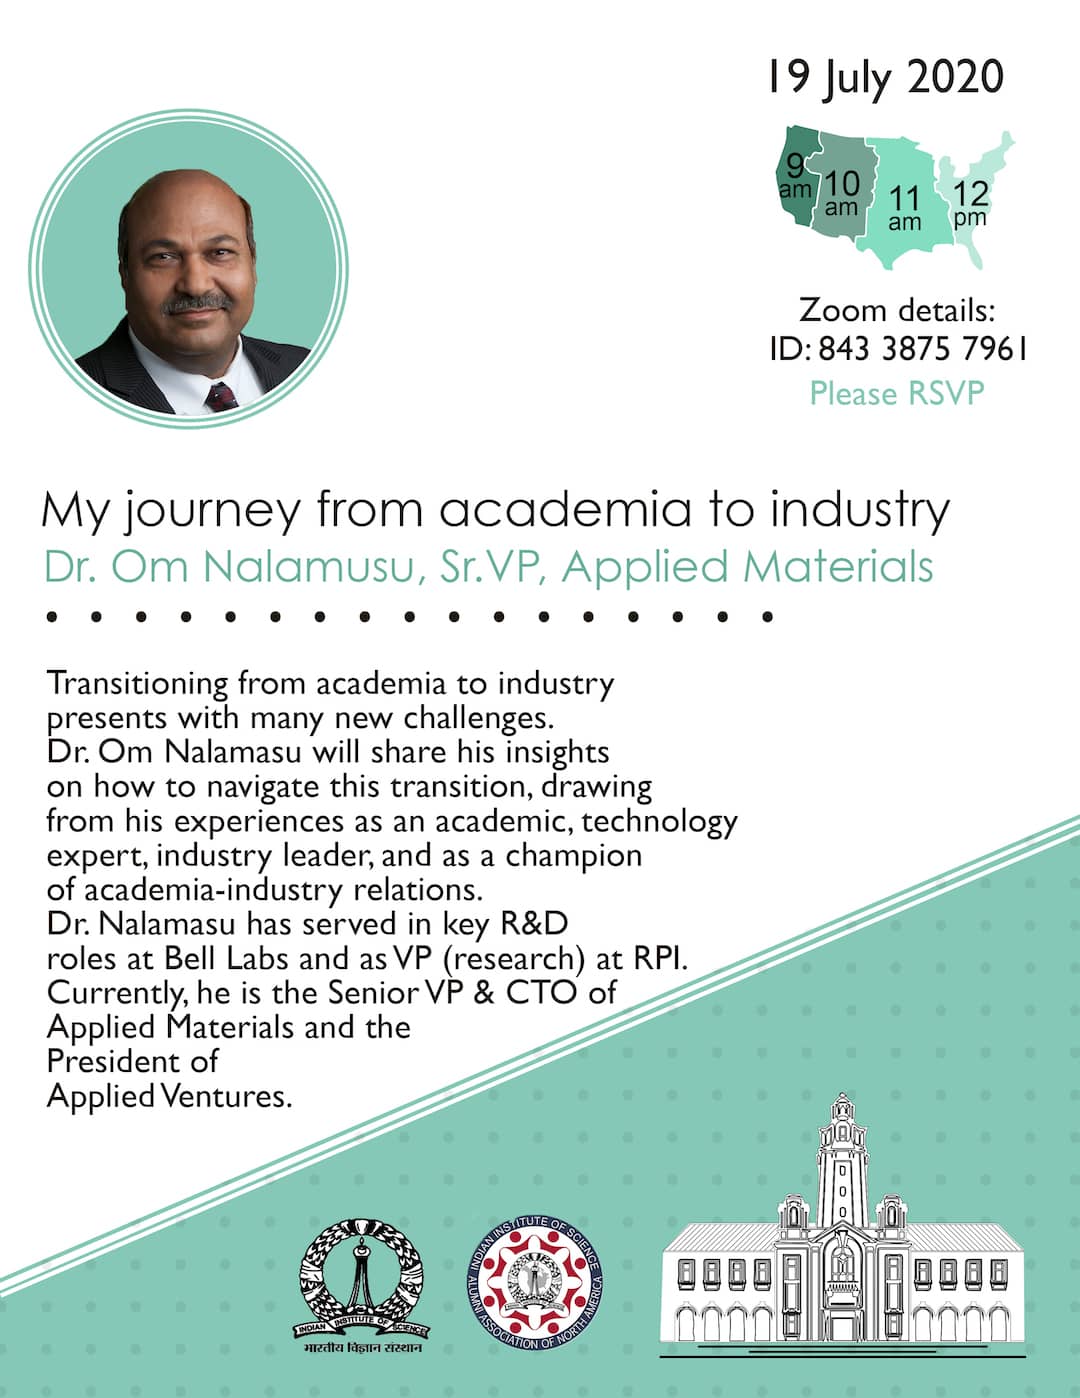 “My Journey from Academia to Industry” – Dr. Om Nalamusu, Sr. VP, Applied Materials